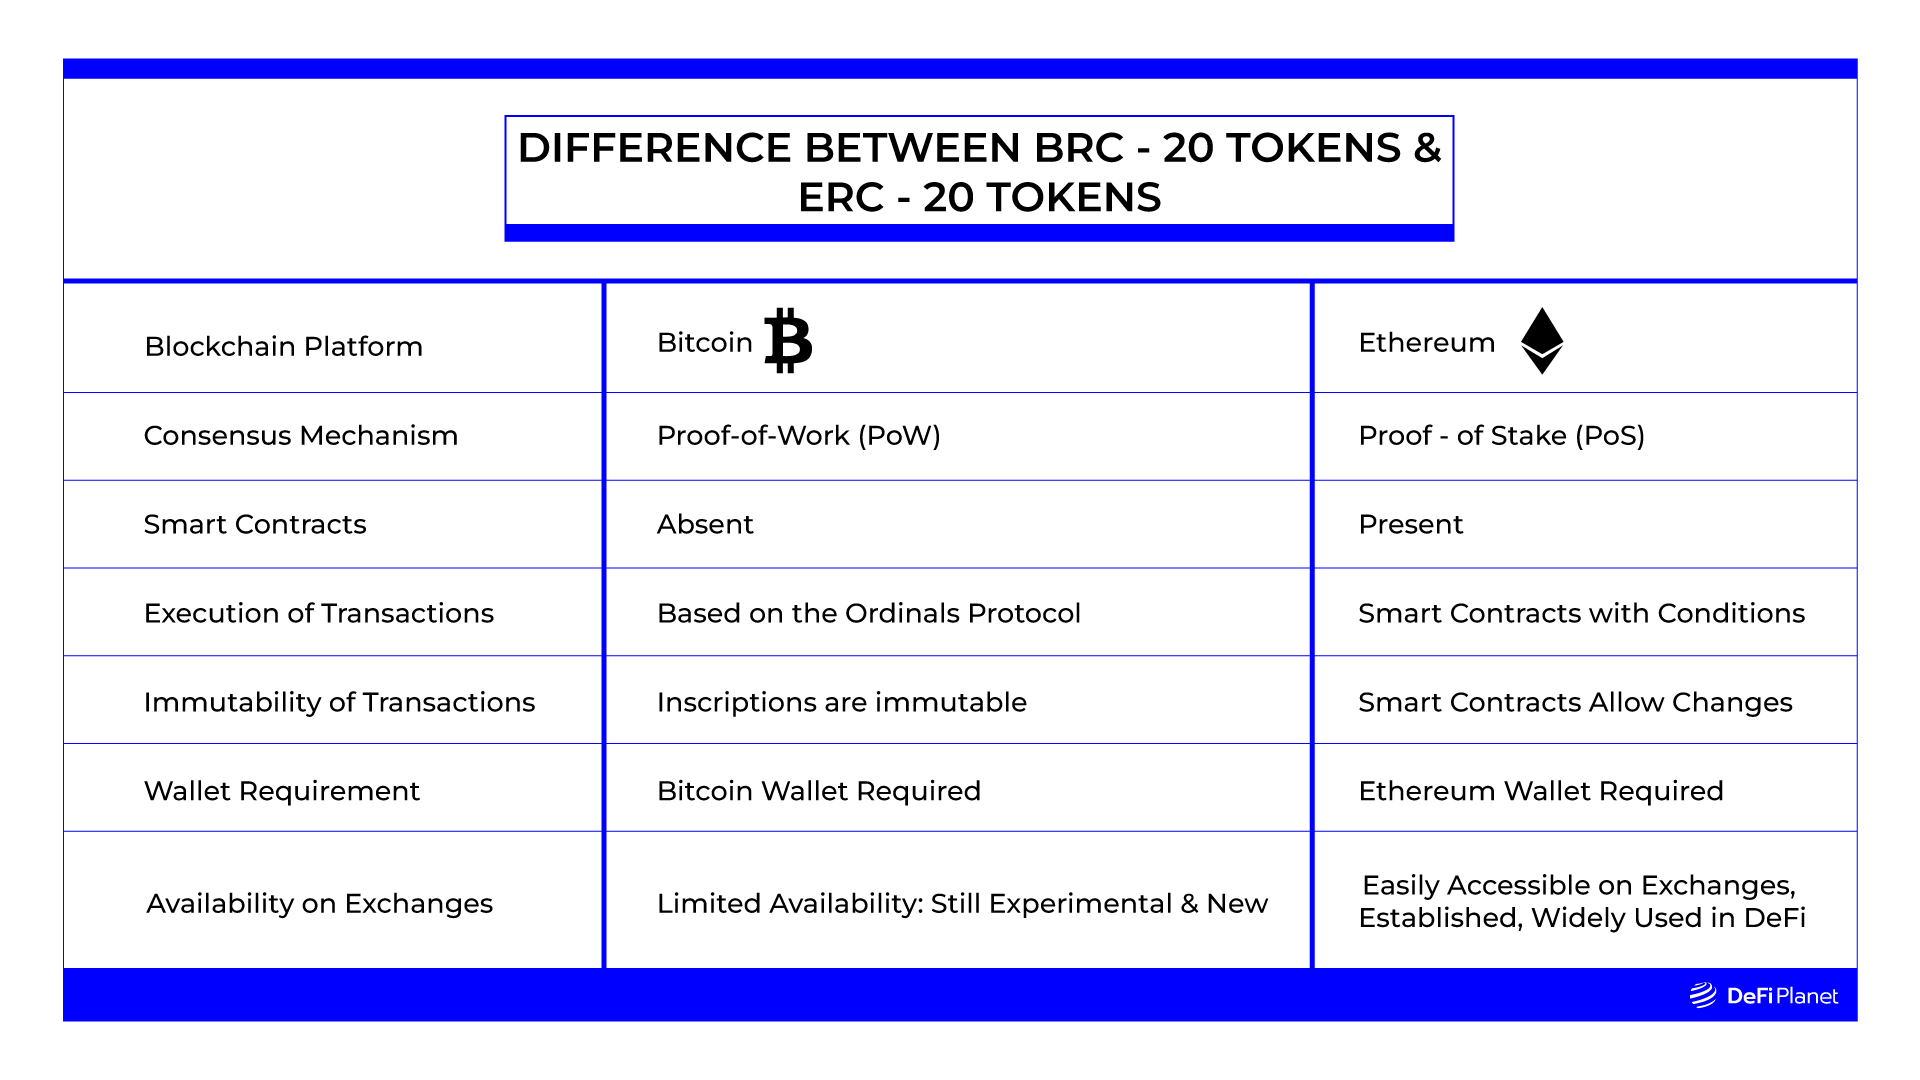 Difference Between BRC-20 and ERC-20 Tokens